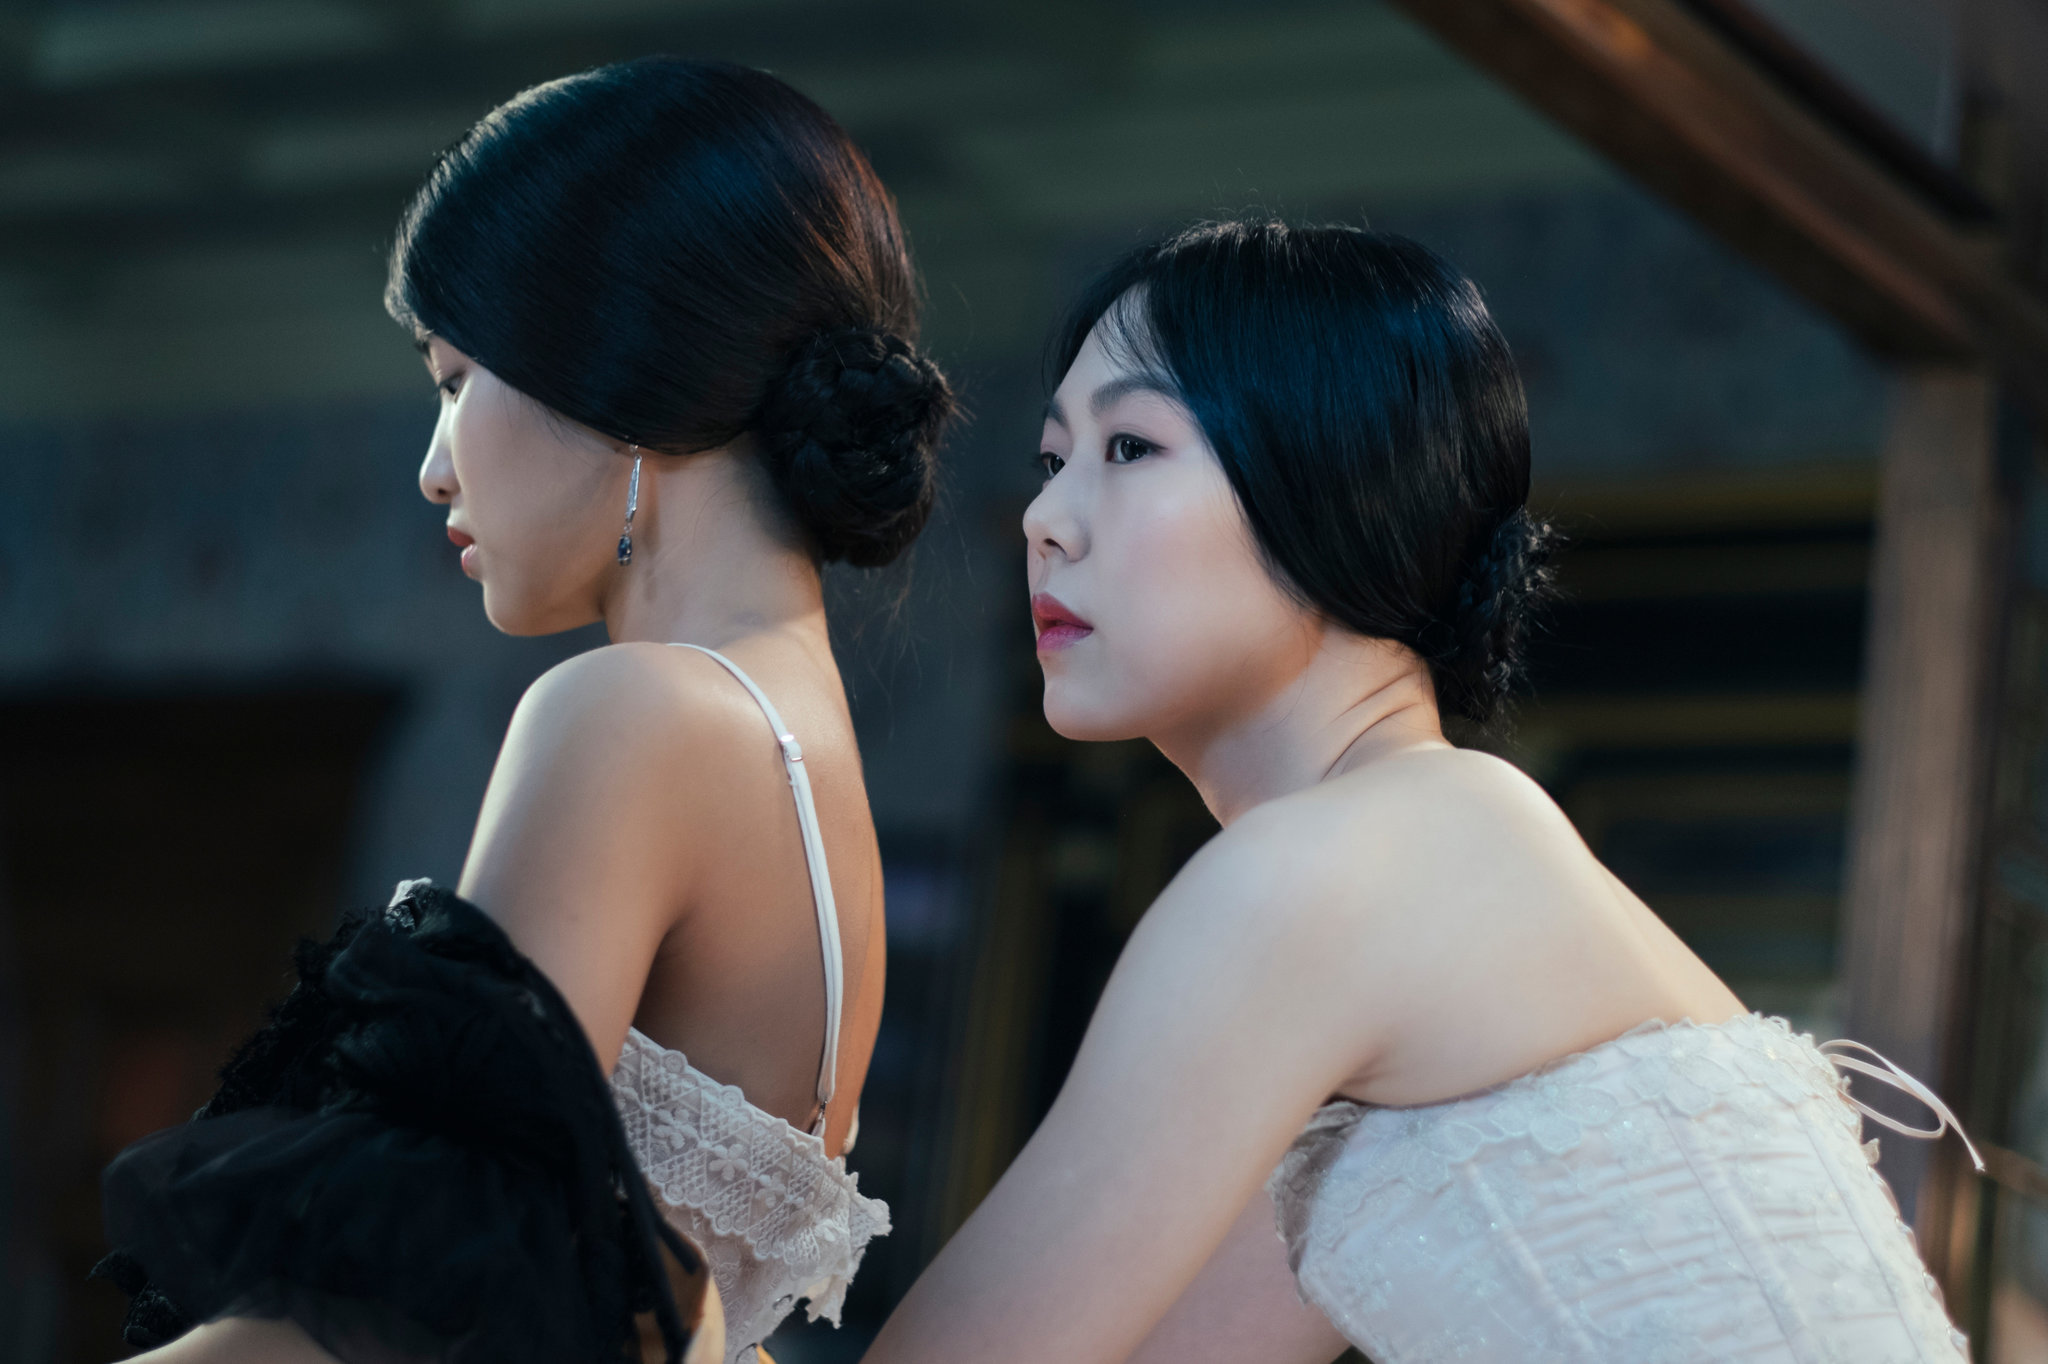 ashley scaggs recommends The Handmaiden Eng Sub